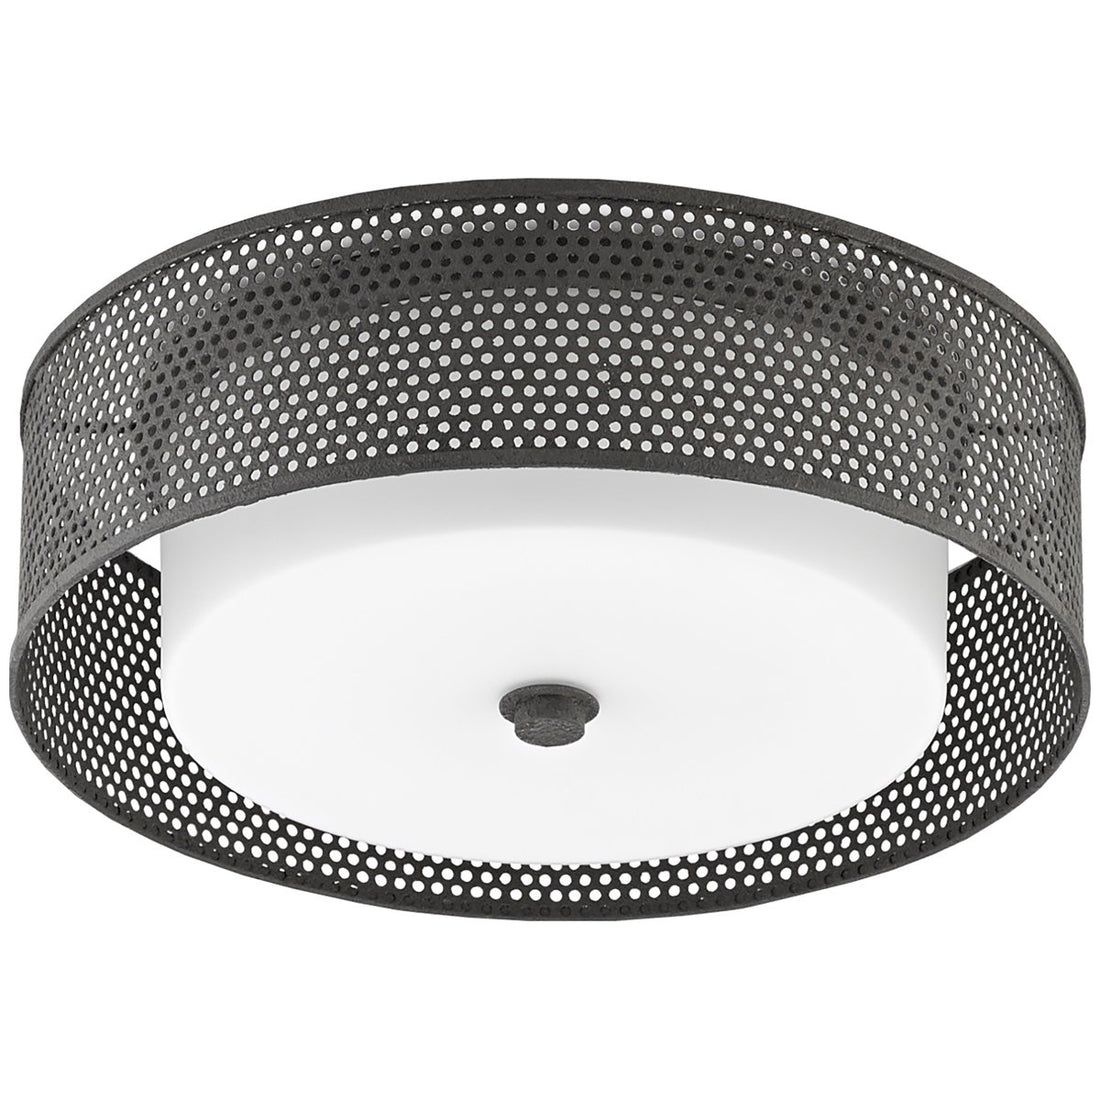 Currey and Company Notte Flush Mount